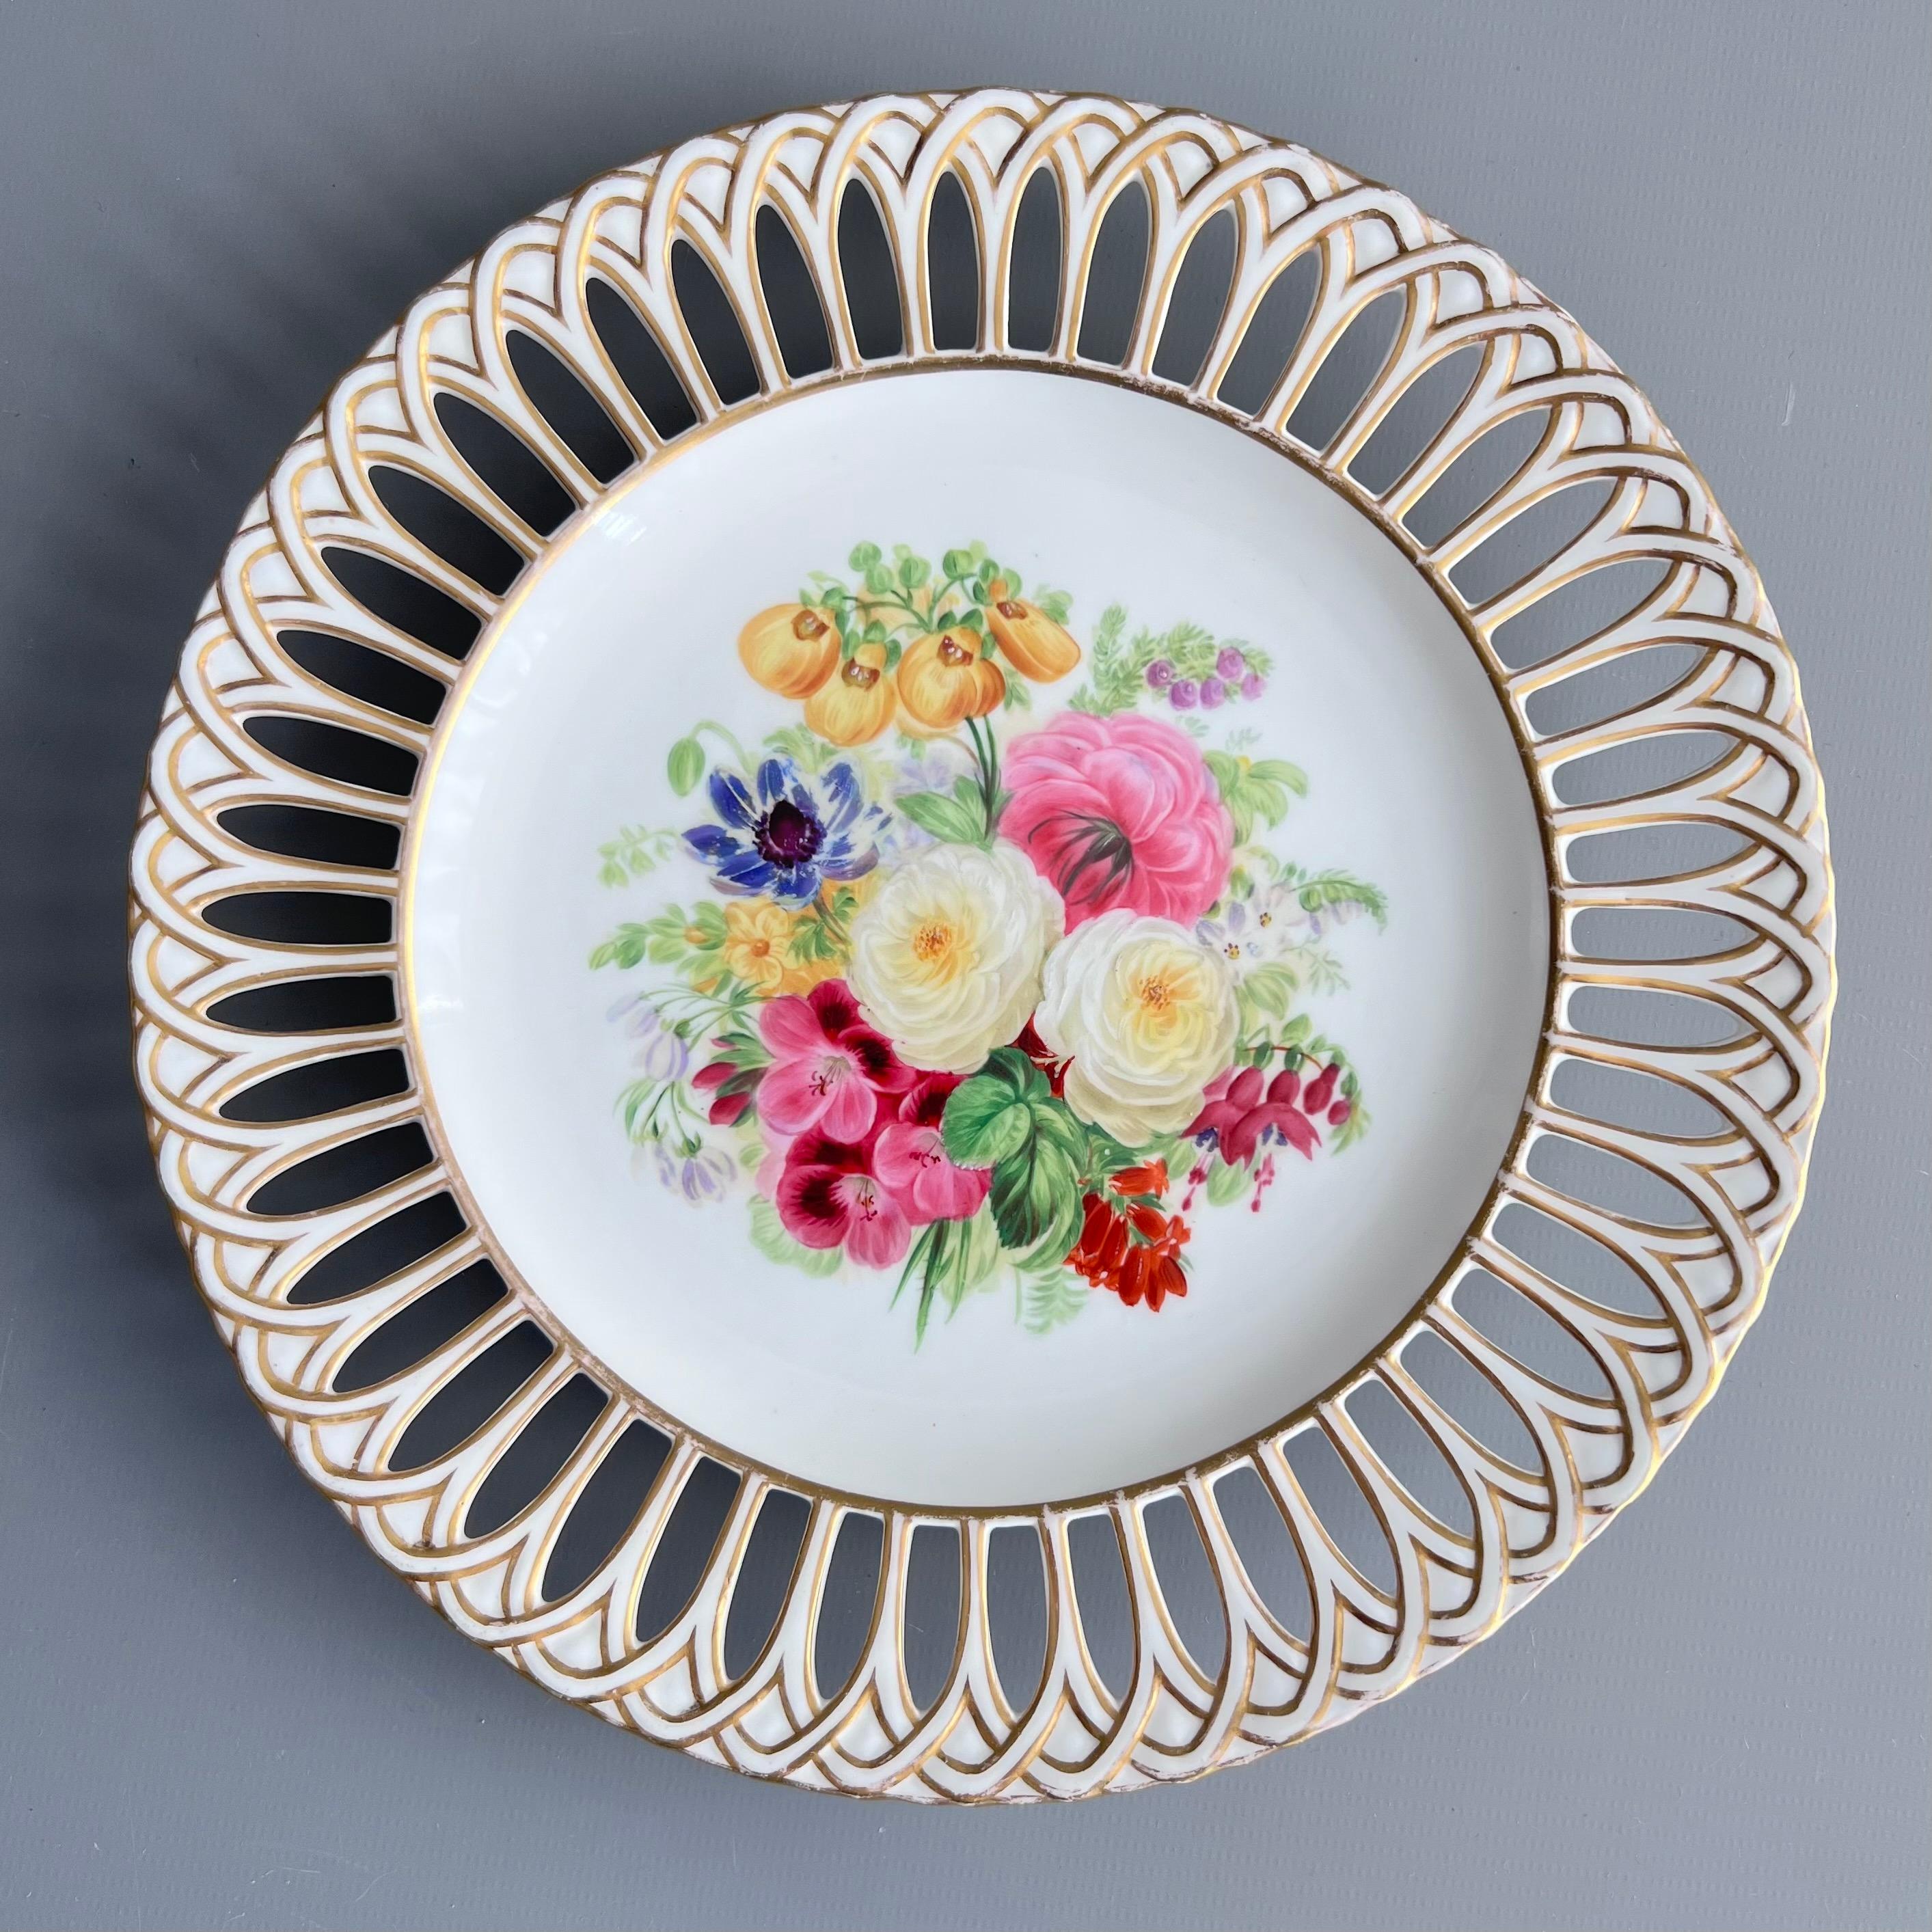 Copeland Set of 8 plates, Reticulated, Sublime Flowers by Greatbatch, 1848 For Sale 7